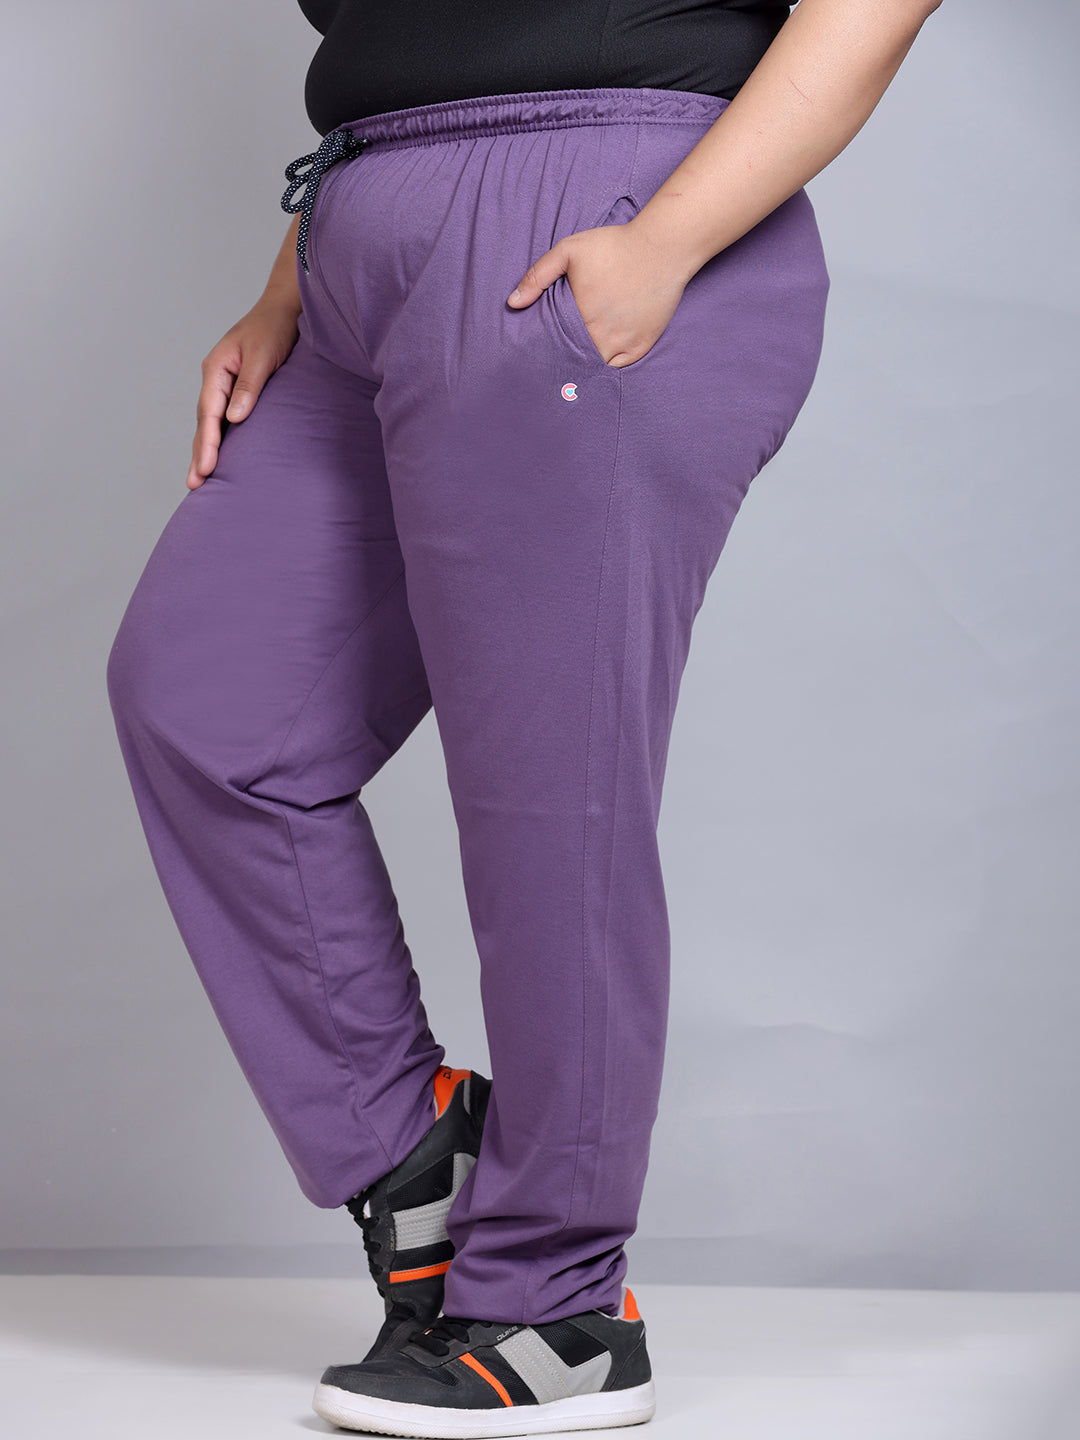 Comfy Lavender Cotton Track Pants For Women At Best Prices